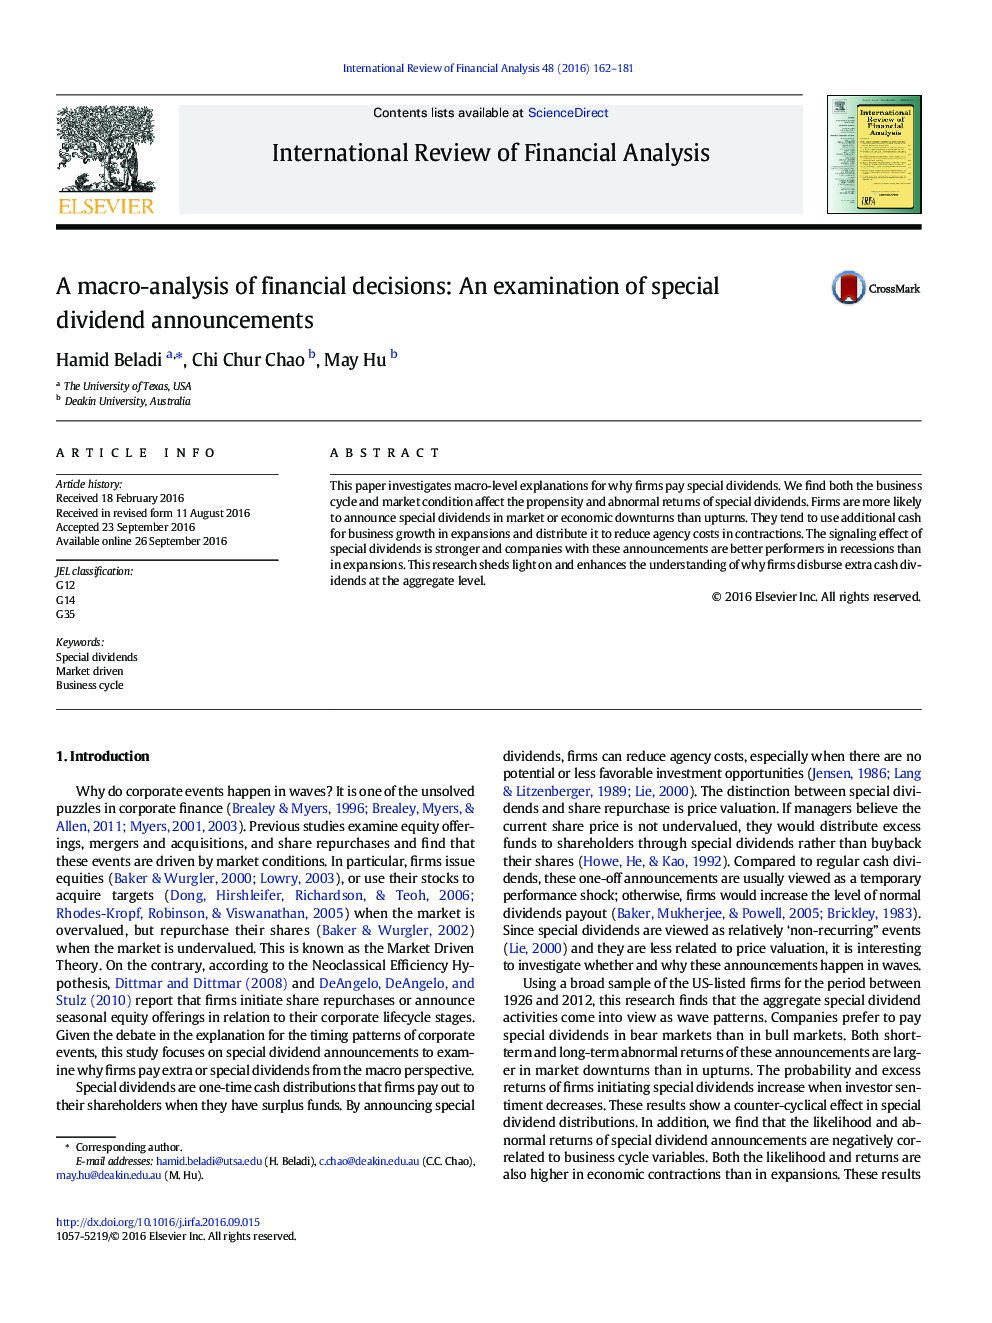 A macro-analysis of financial decisions: An examination of special dividend announcements